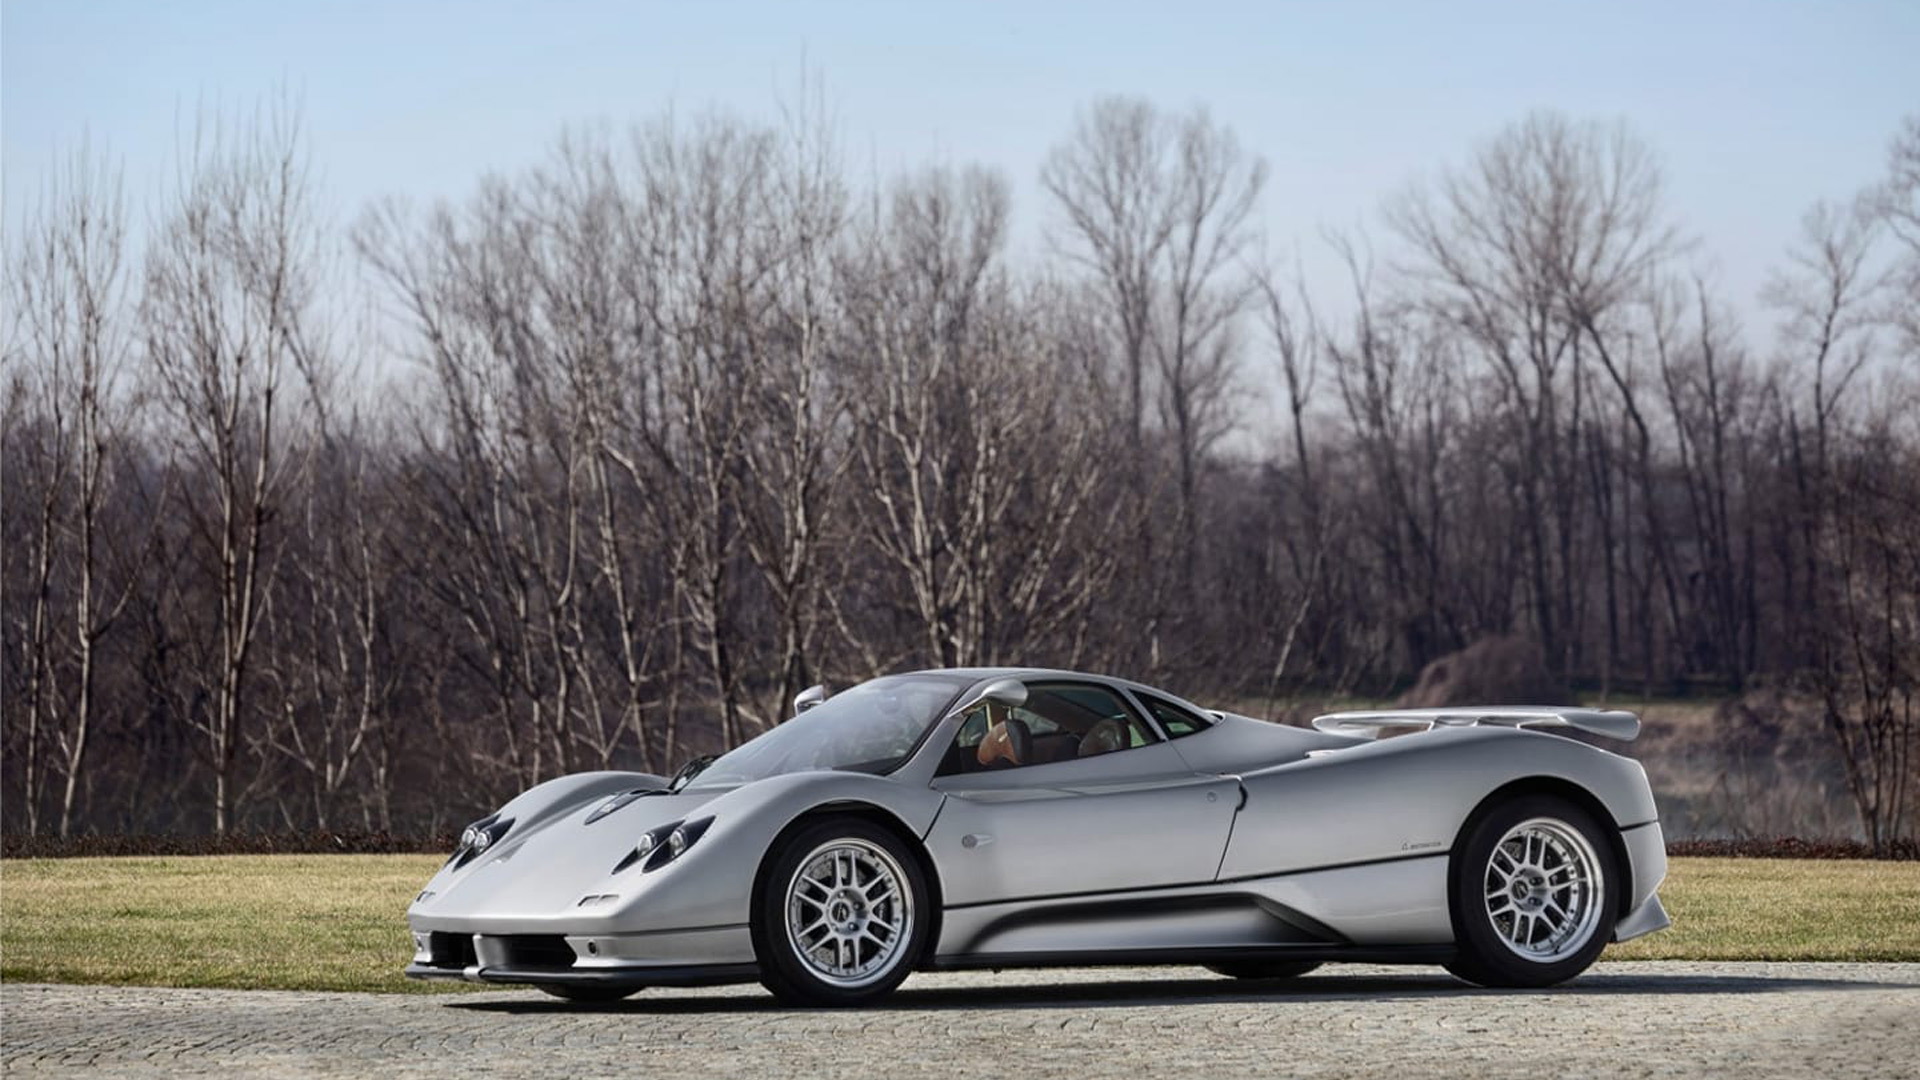 Pagani Zonda C12 with chassis number ending in 001